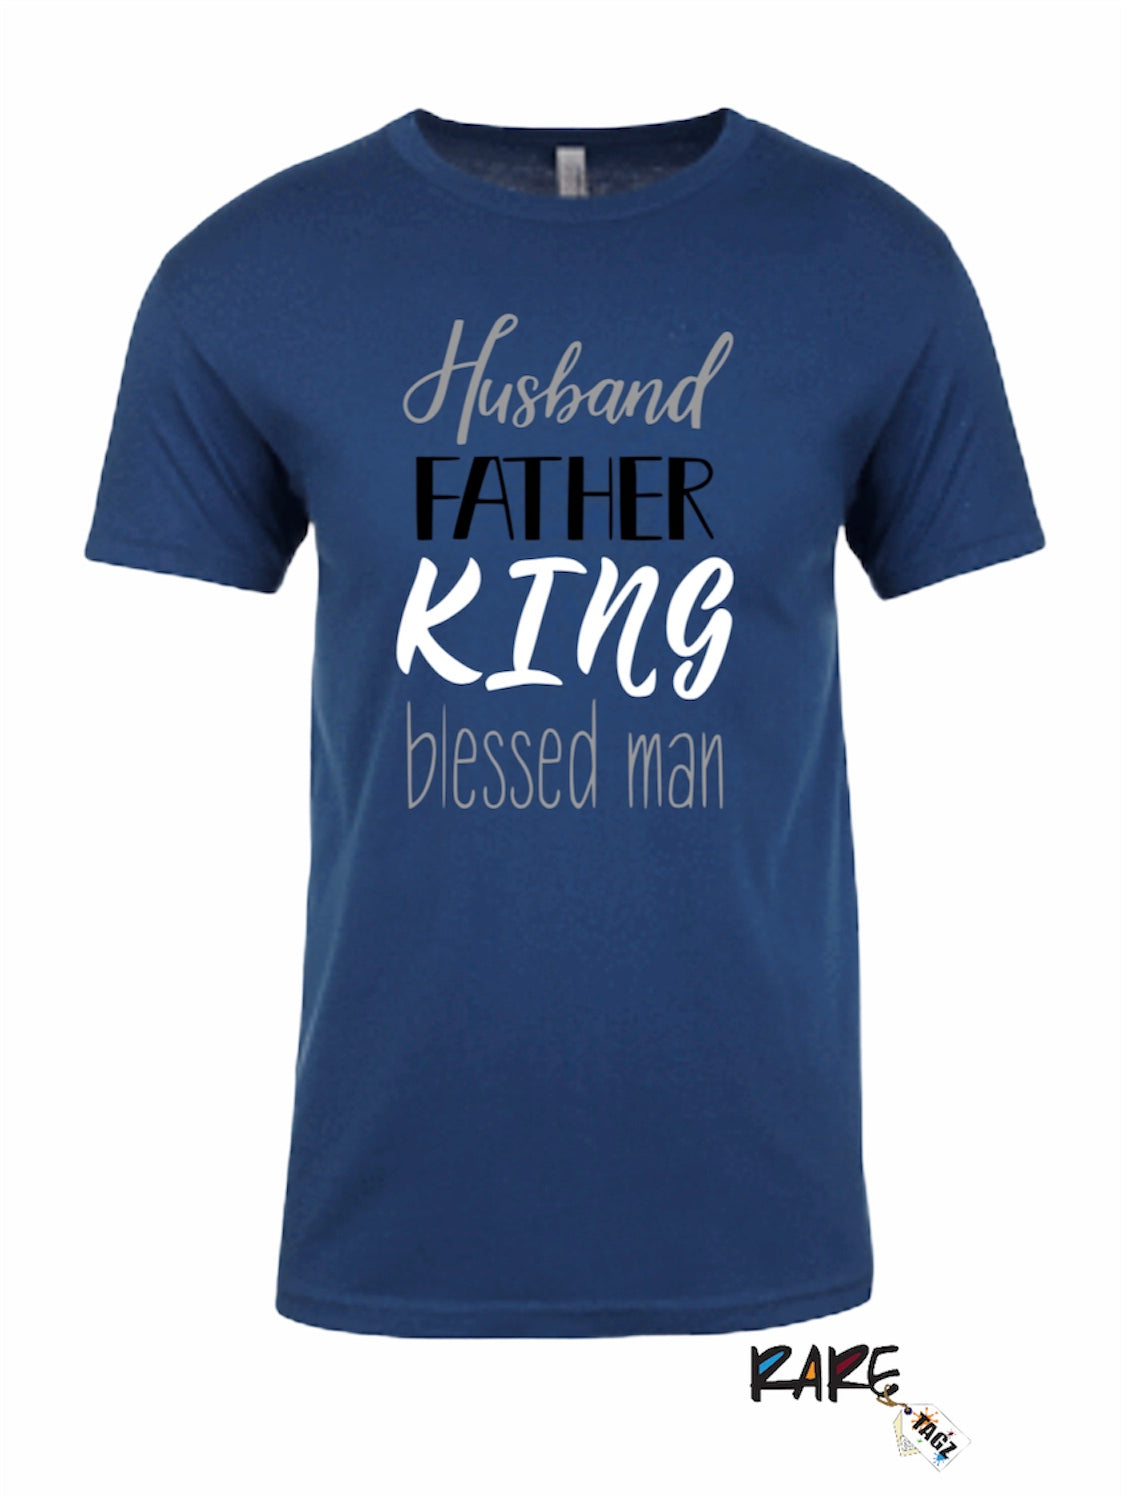 "Husband Father King Blessed Man" Tee